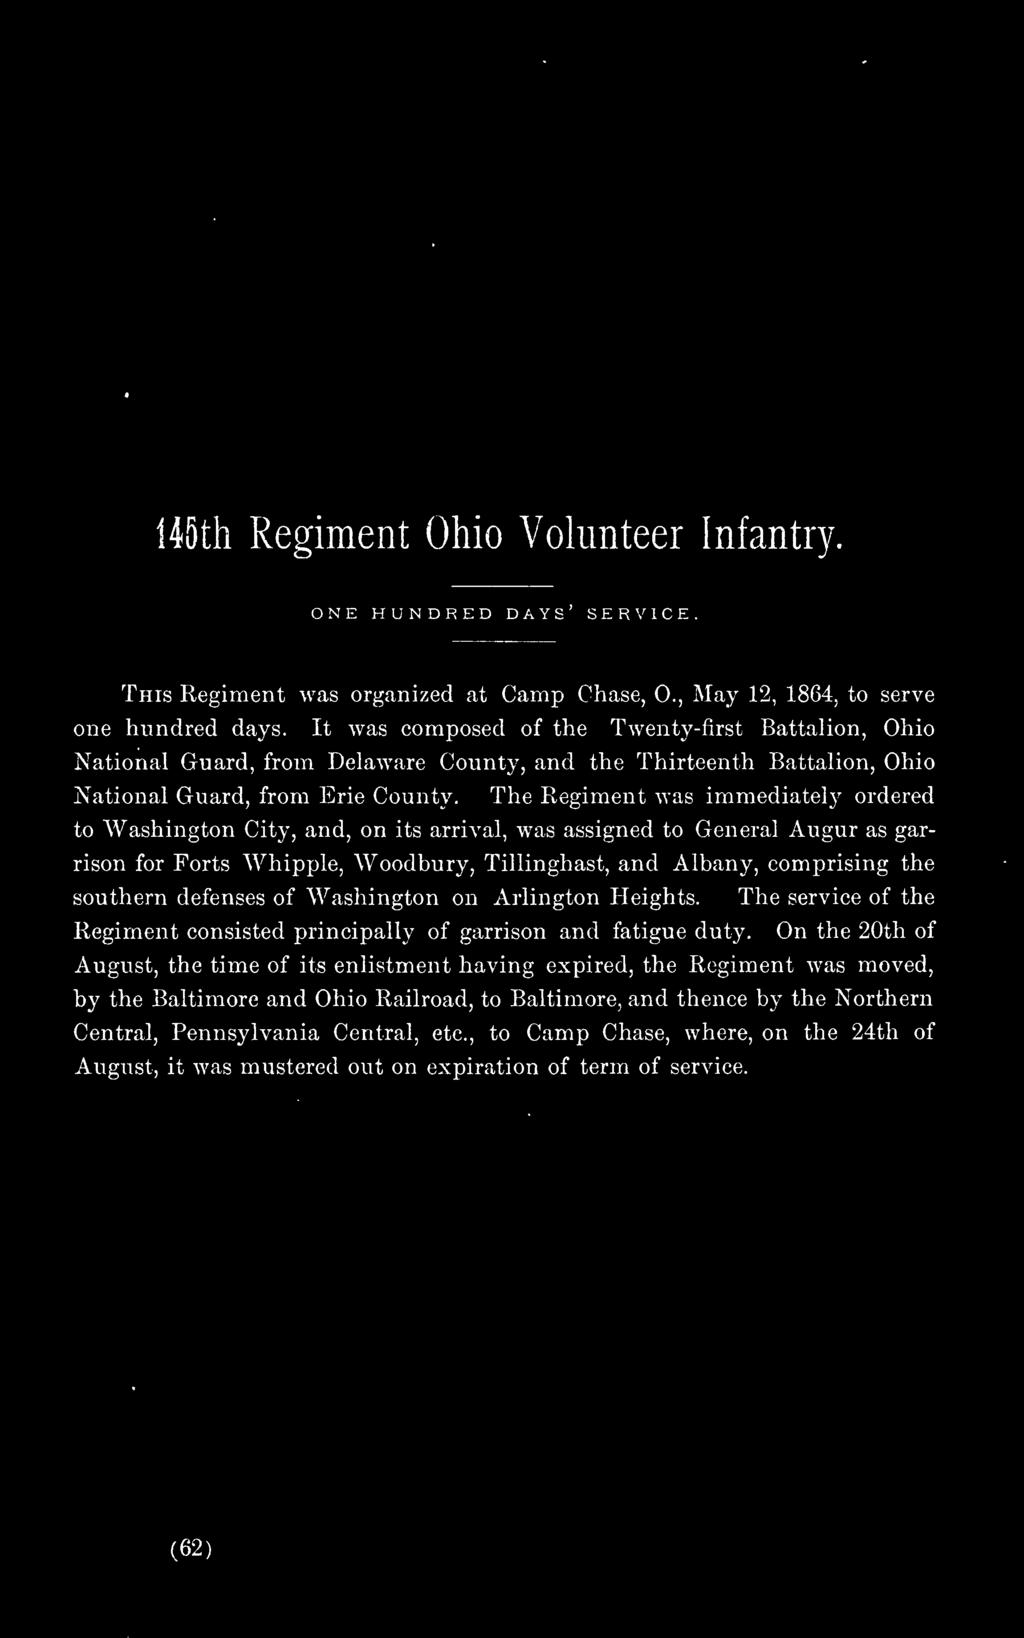 The Regiment was immediately ordered to Washington City, and, on its arrival, was assigned to General Augur as gar rison for Forts Whipple, Woodbury, Tillinghast, and Albany, comprising the southern